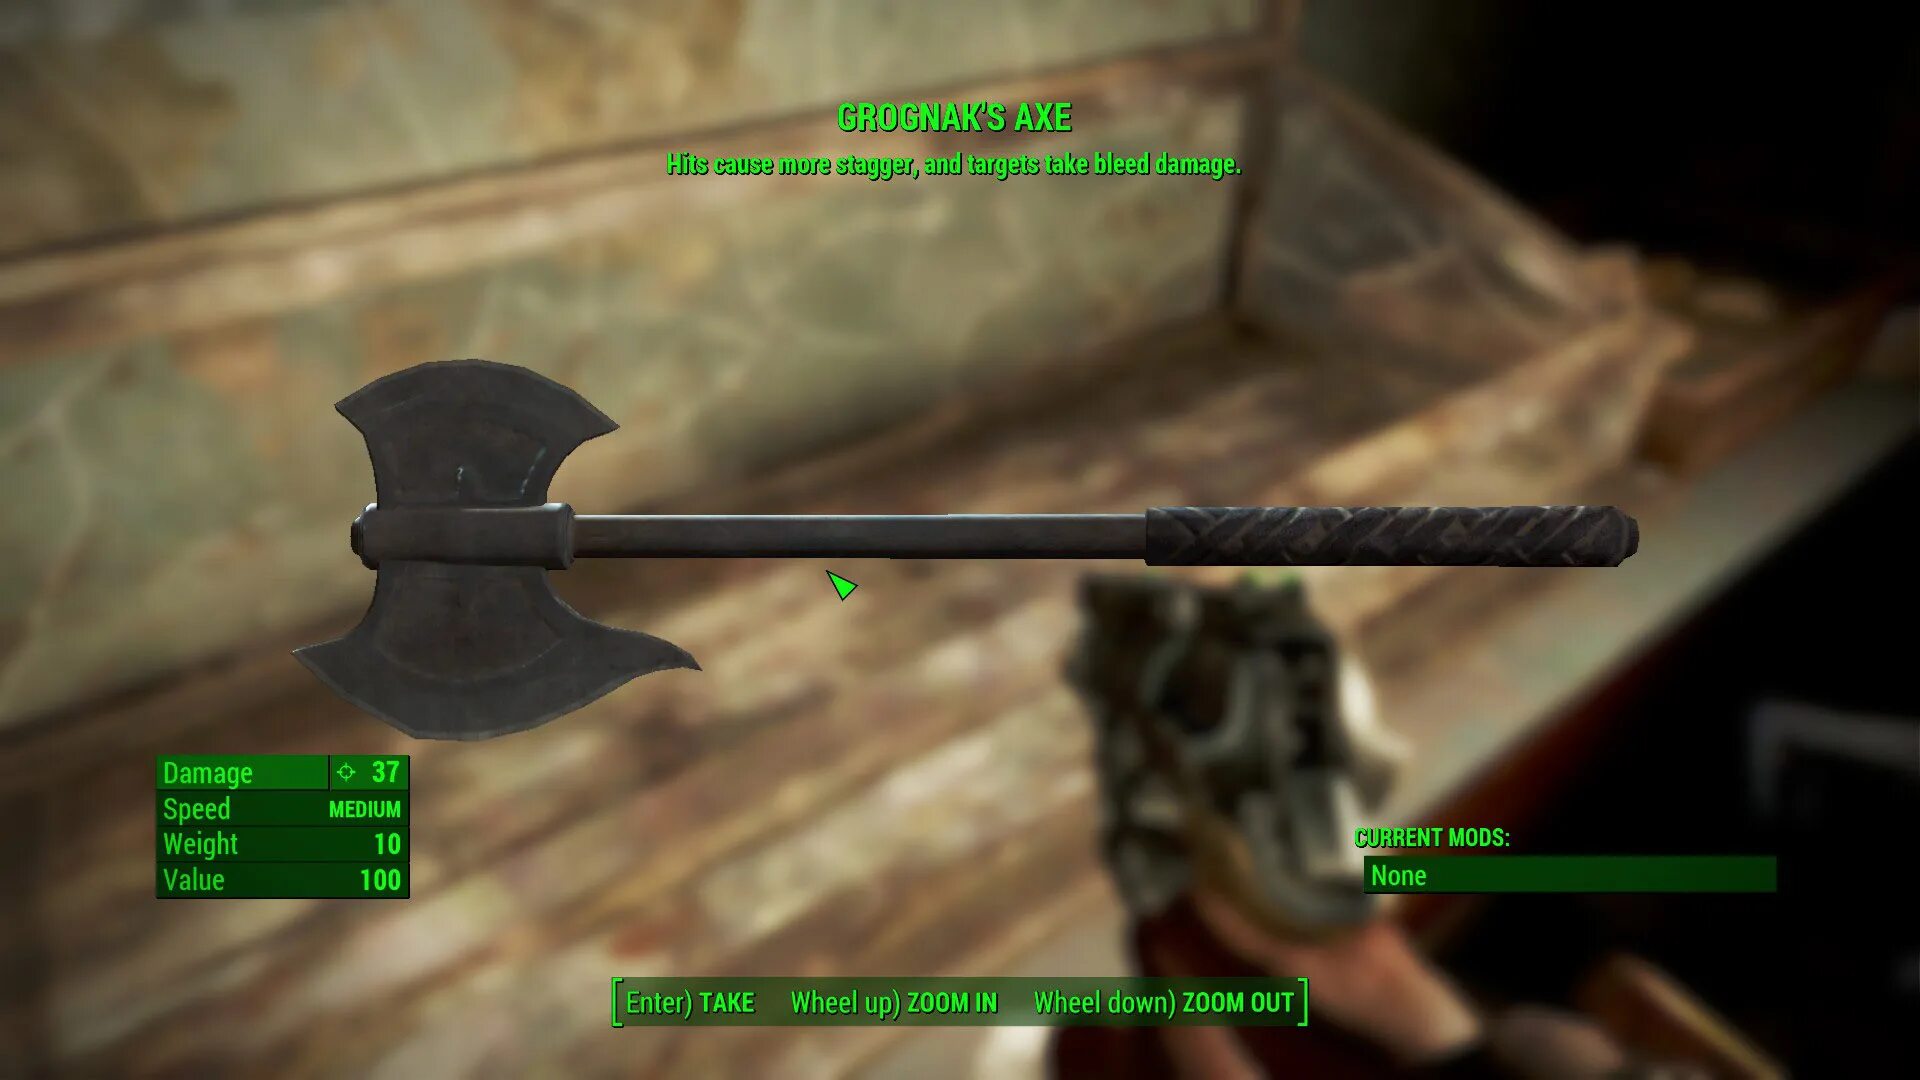 Hit causes. Fallout 4 Melee Weapon. Топор Грогнака. Топор фоллаут. Грогнак варвар Fallout 4.